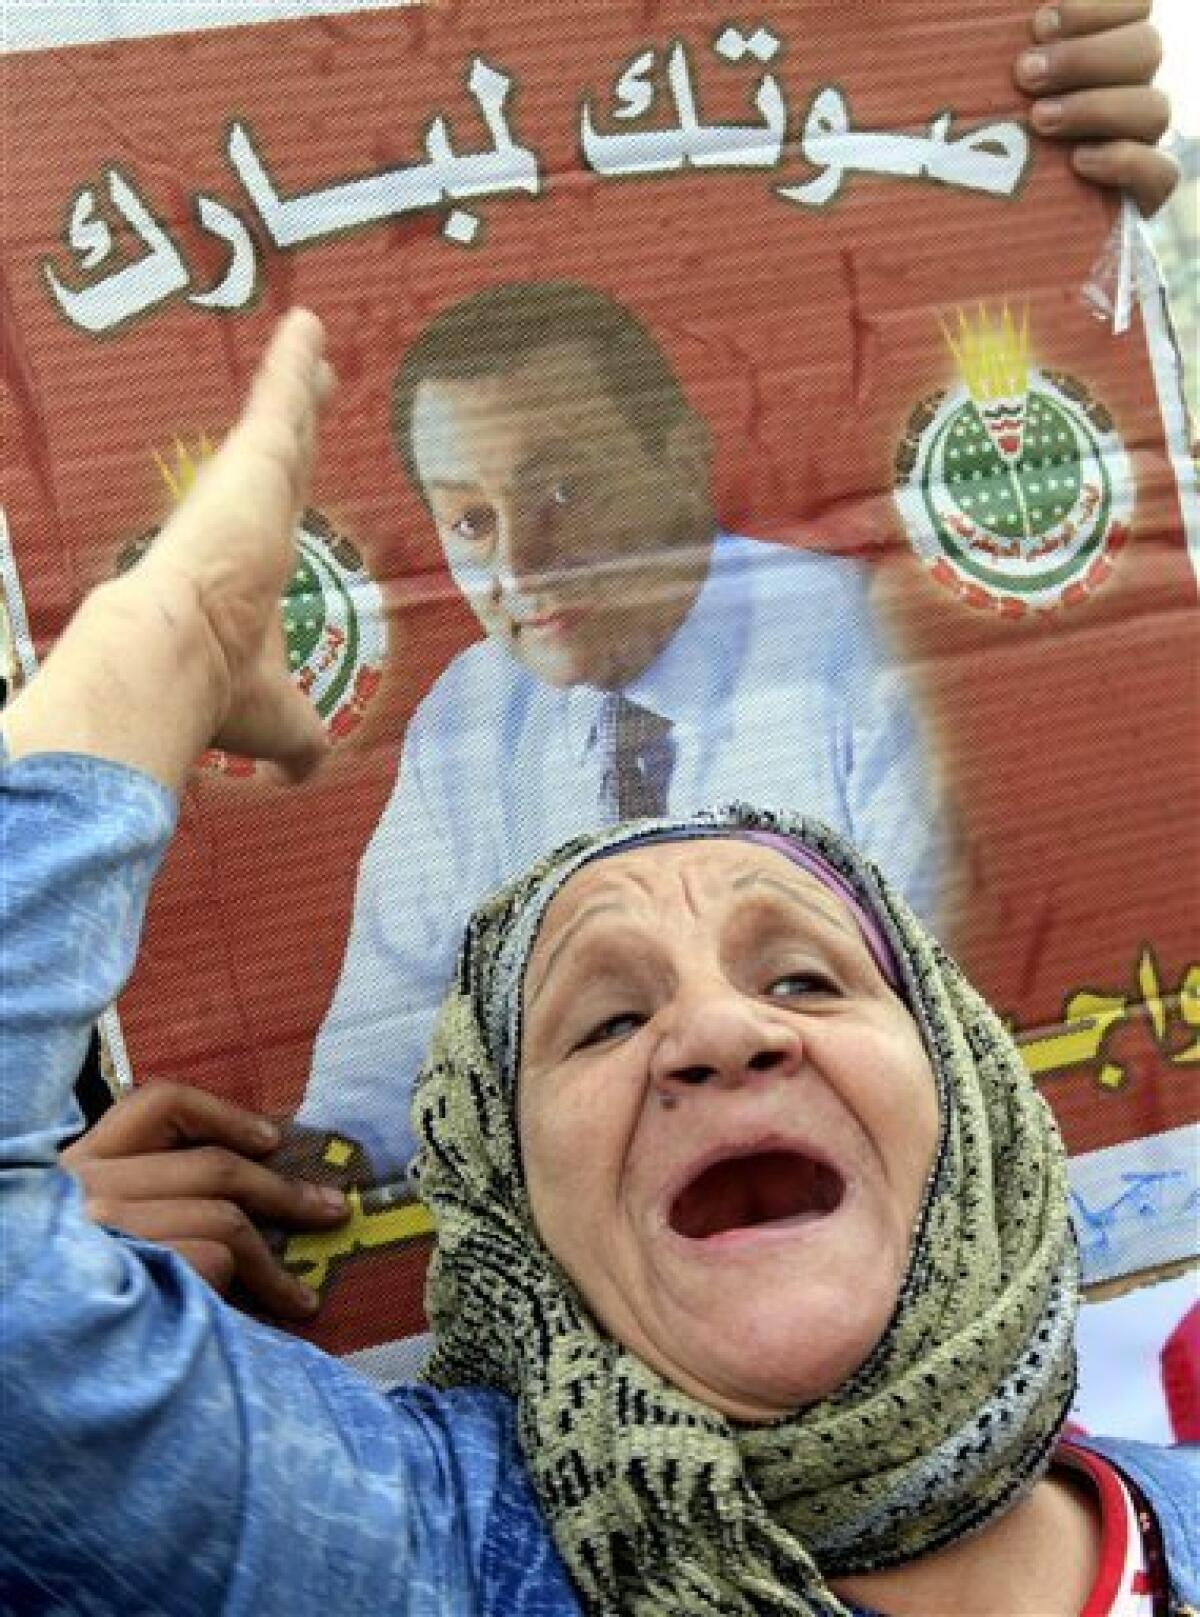 An elderly Egyptian pro-Mubarak supporter shouts supporting slogans during a march in Cairo, Egypt, Tuesday, Feb. 1, 2011. Egyptian authorities battled to save President Hosni Mubarak's regime with a series of concessions and promises to protesters, but realities on the streets of Cairo may be outrunning his capacity for change. Arabic poster dating from 2005 Presidential elections reads " your vote to Mubarak" (AP Photo/Amr Nabil)